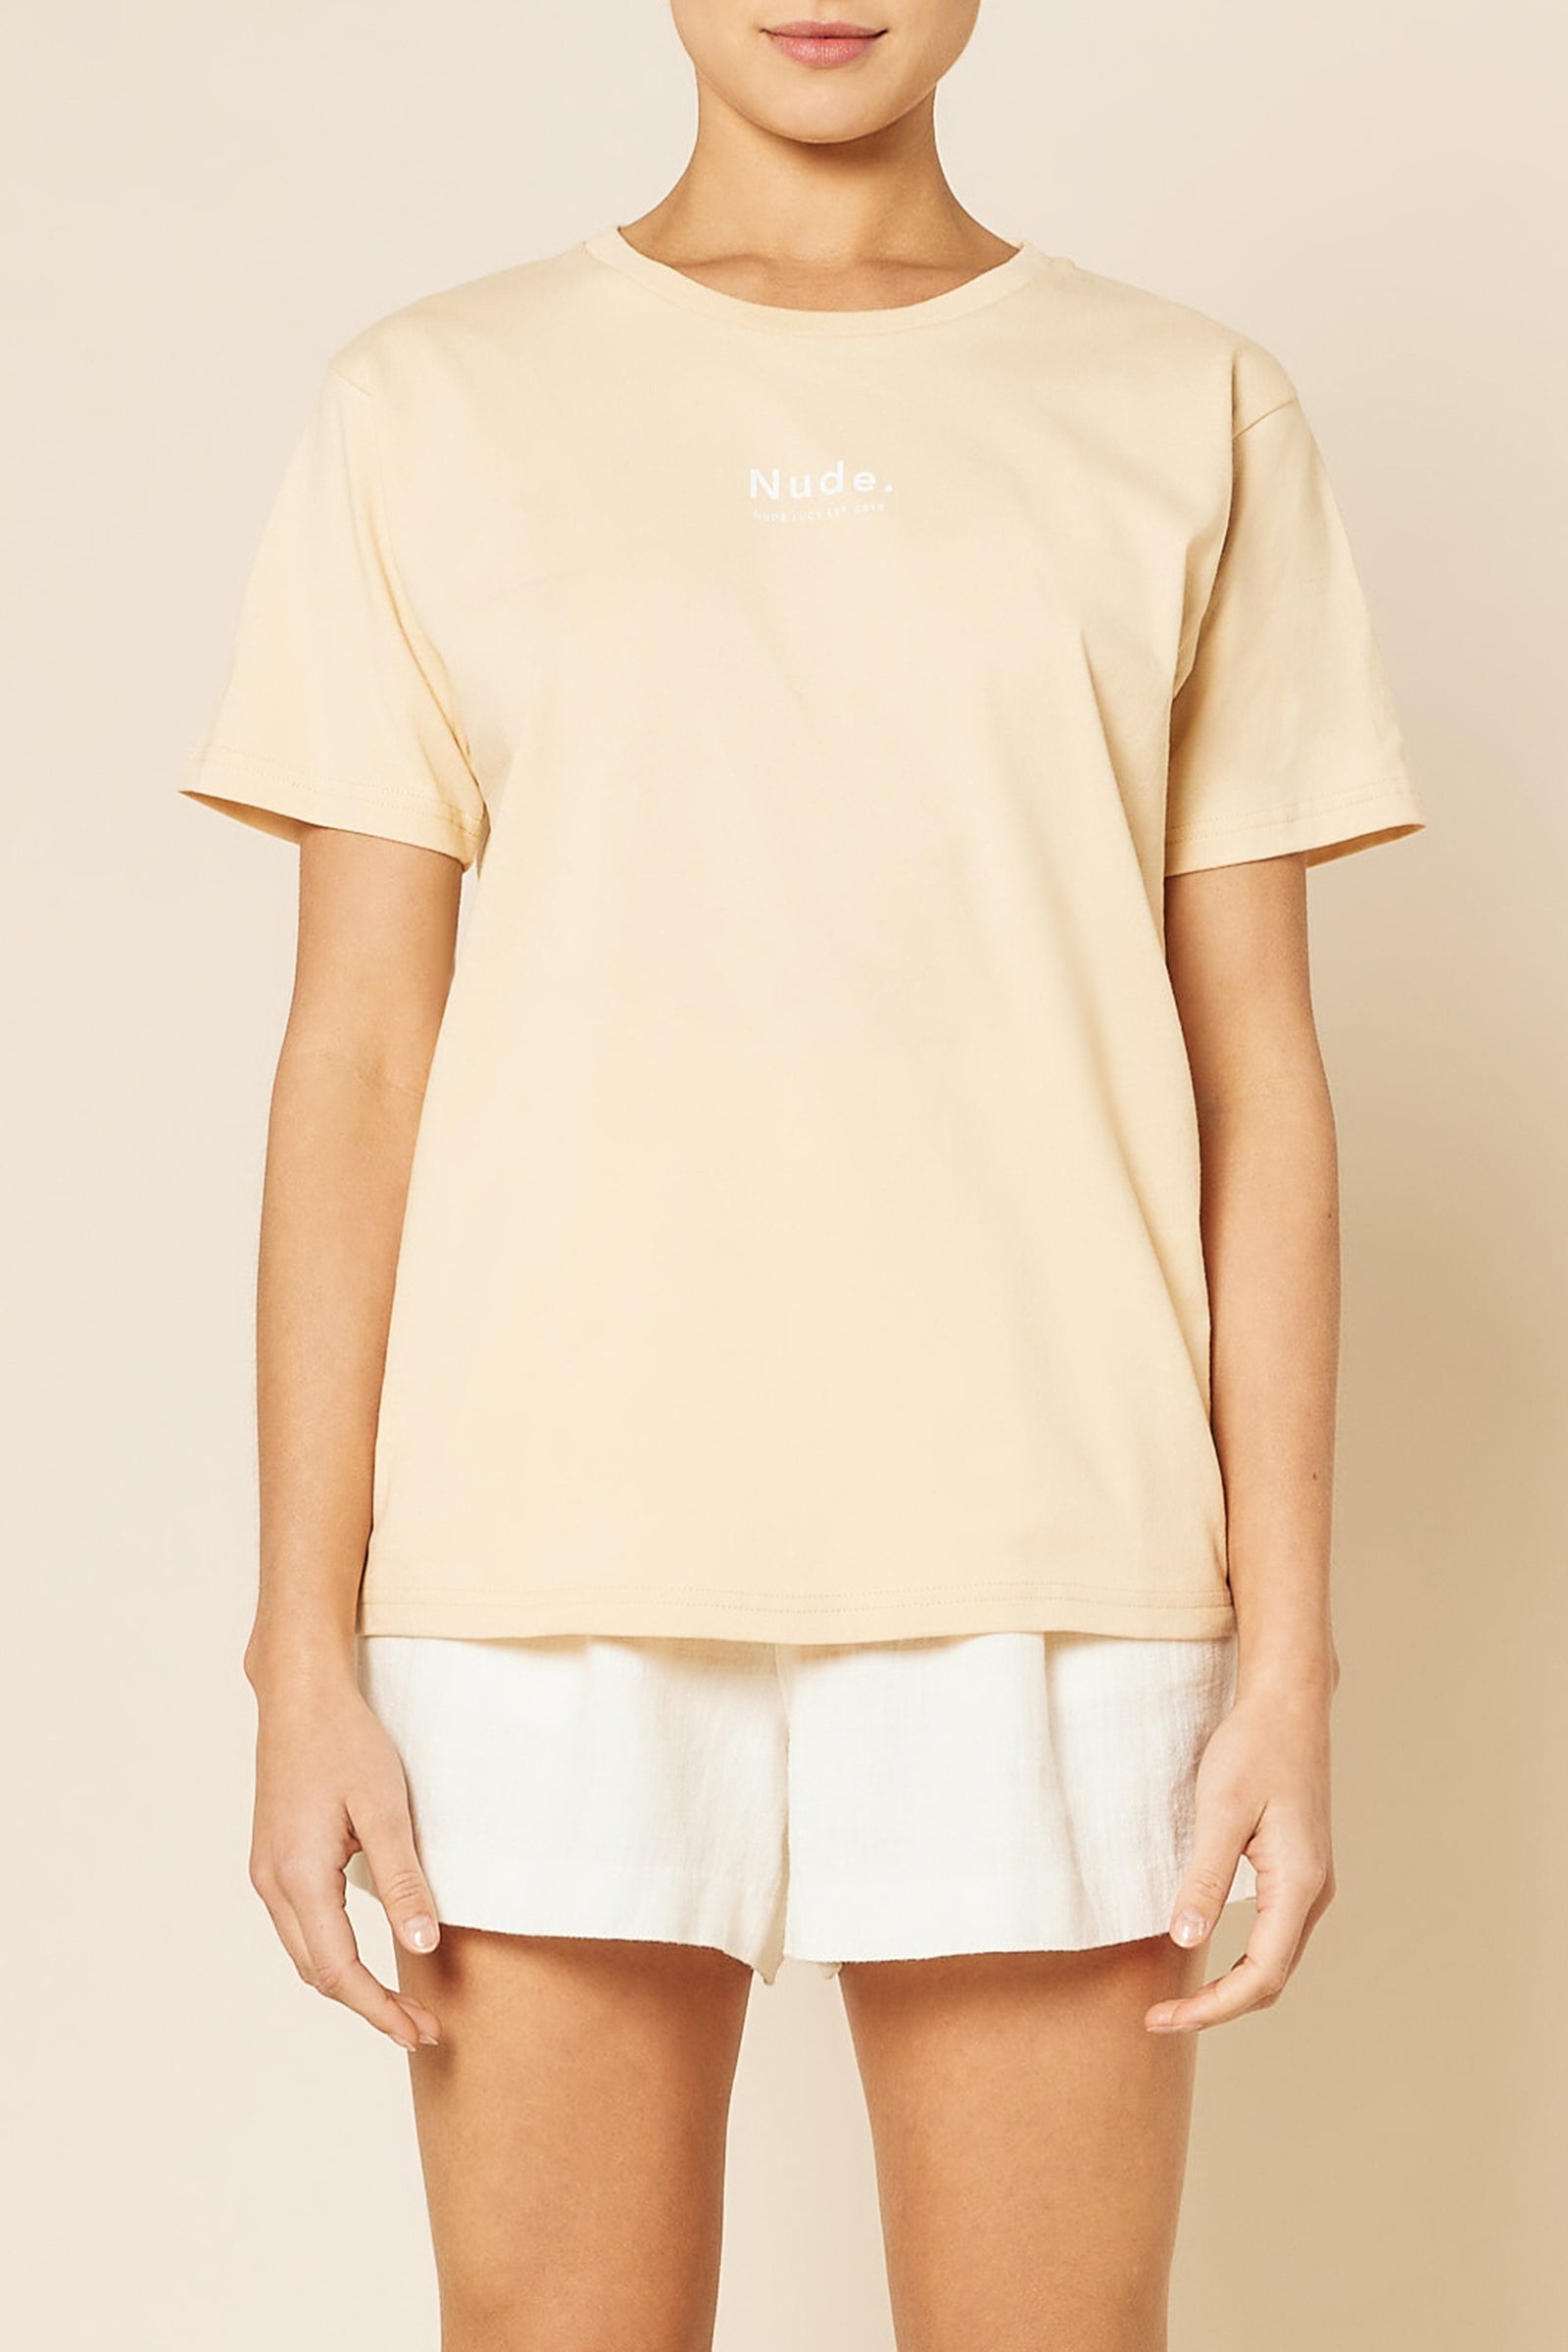 Nude Lucy Nude Organic Heritage Tee In a Light Brown Butter Colour 